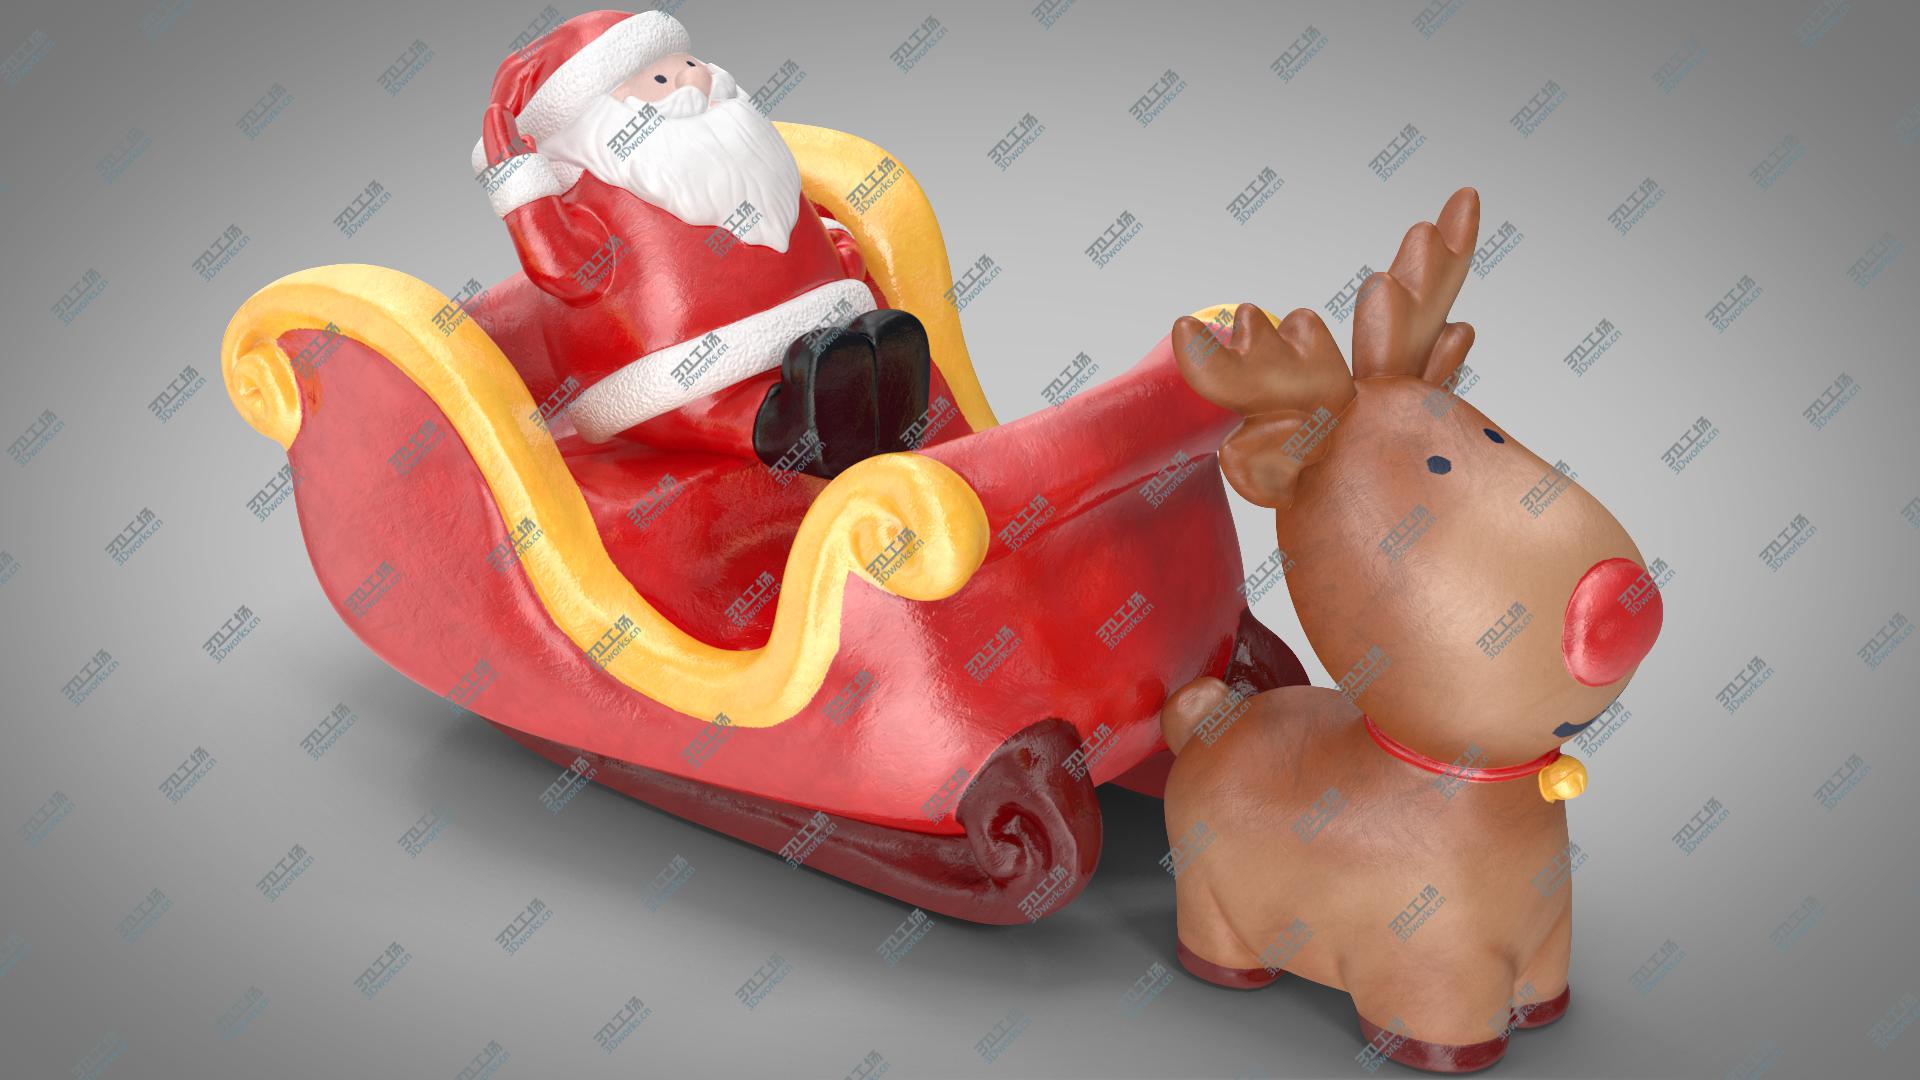 images/goods_img/202105071/Santa Claus with Sleigh Decorative Figurine 3 3D/1.jpg